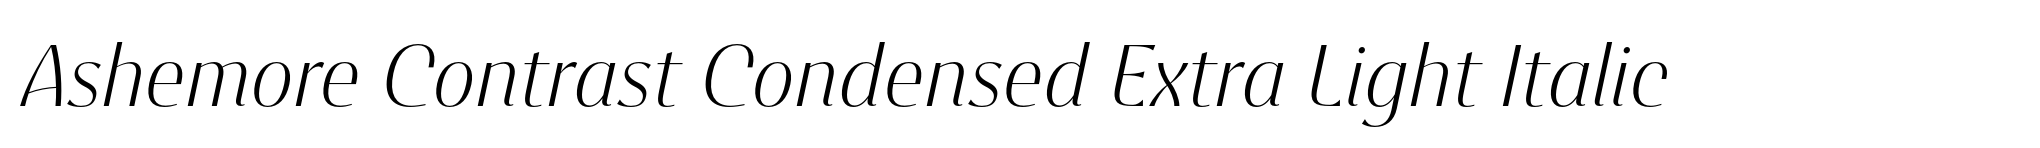 Ashemore Contrast Condensed Extra Light Italic image